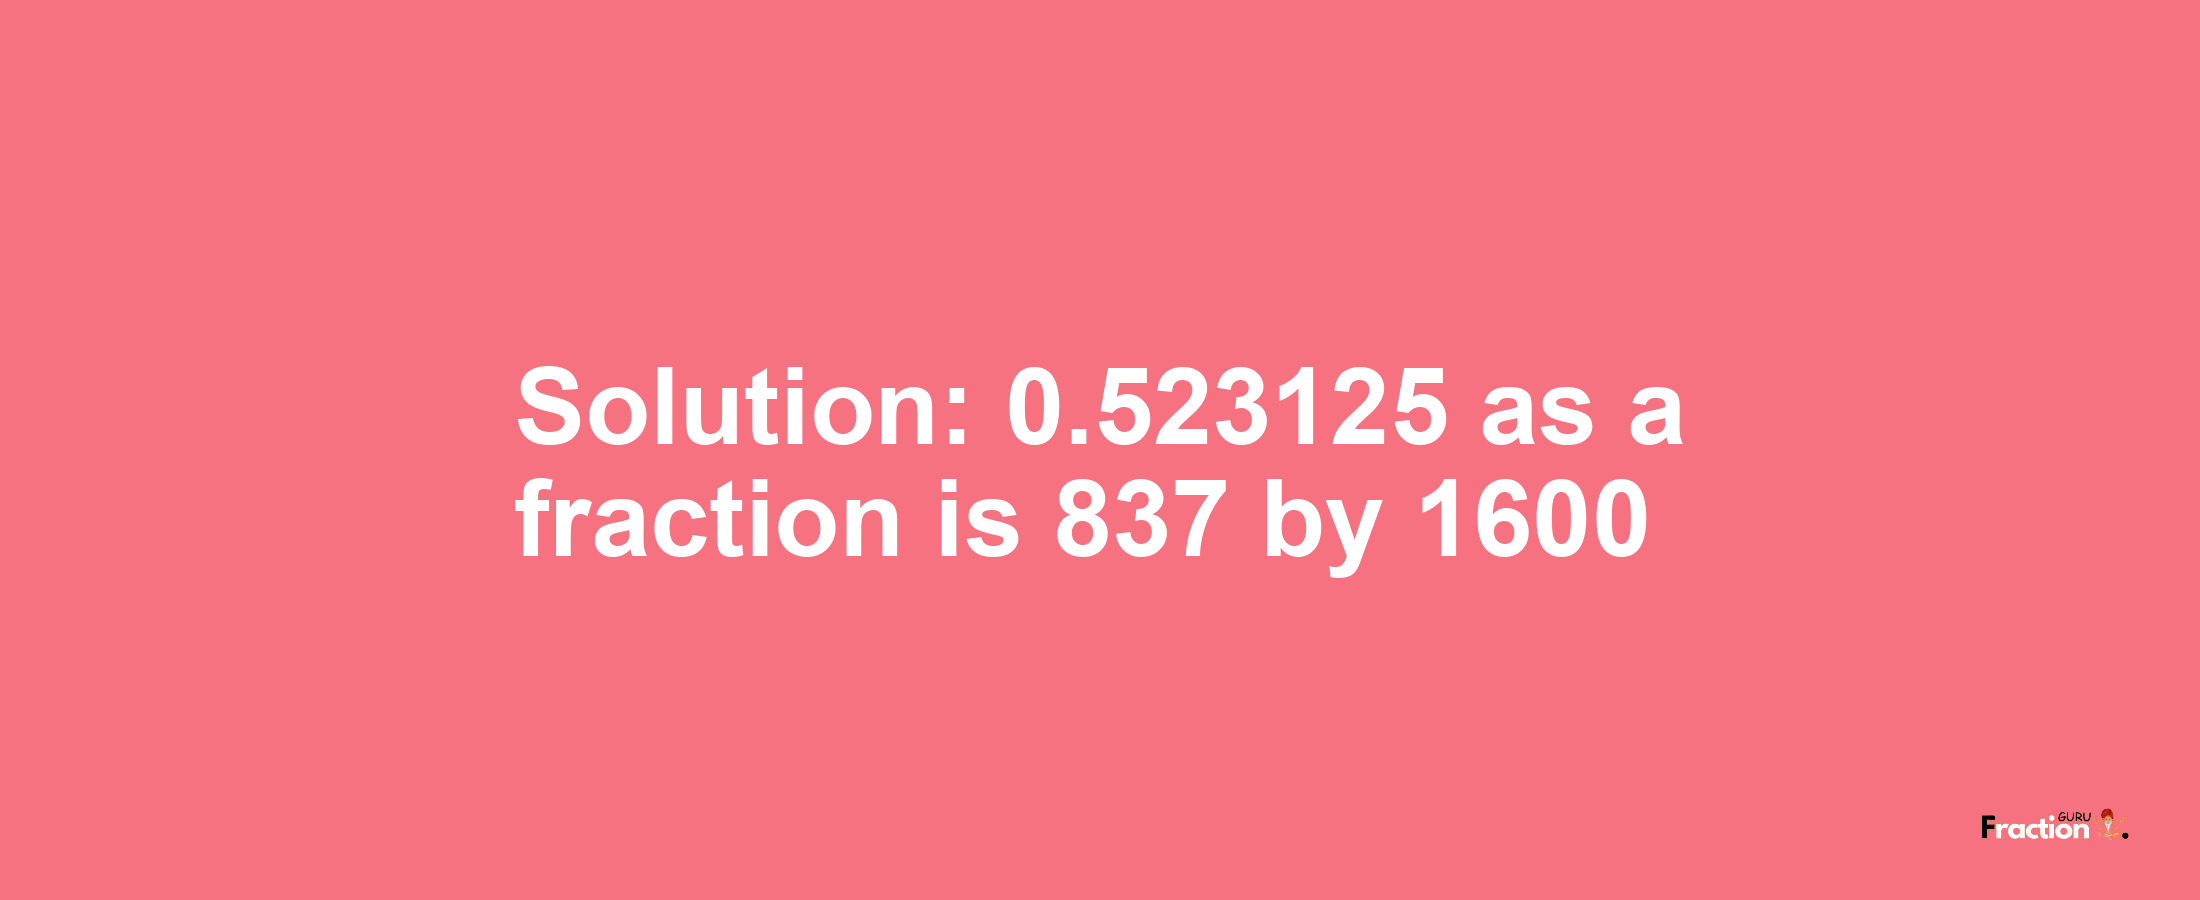 Solution:0.523125 as a fraction is 837/1600